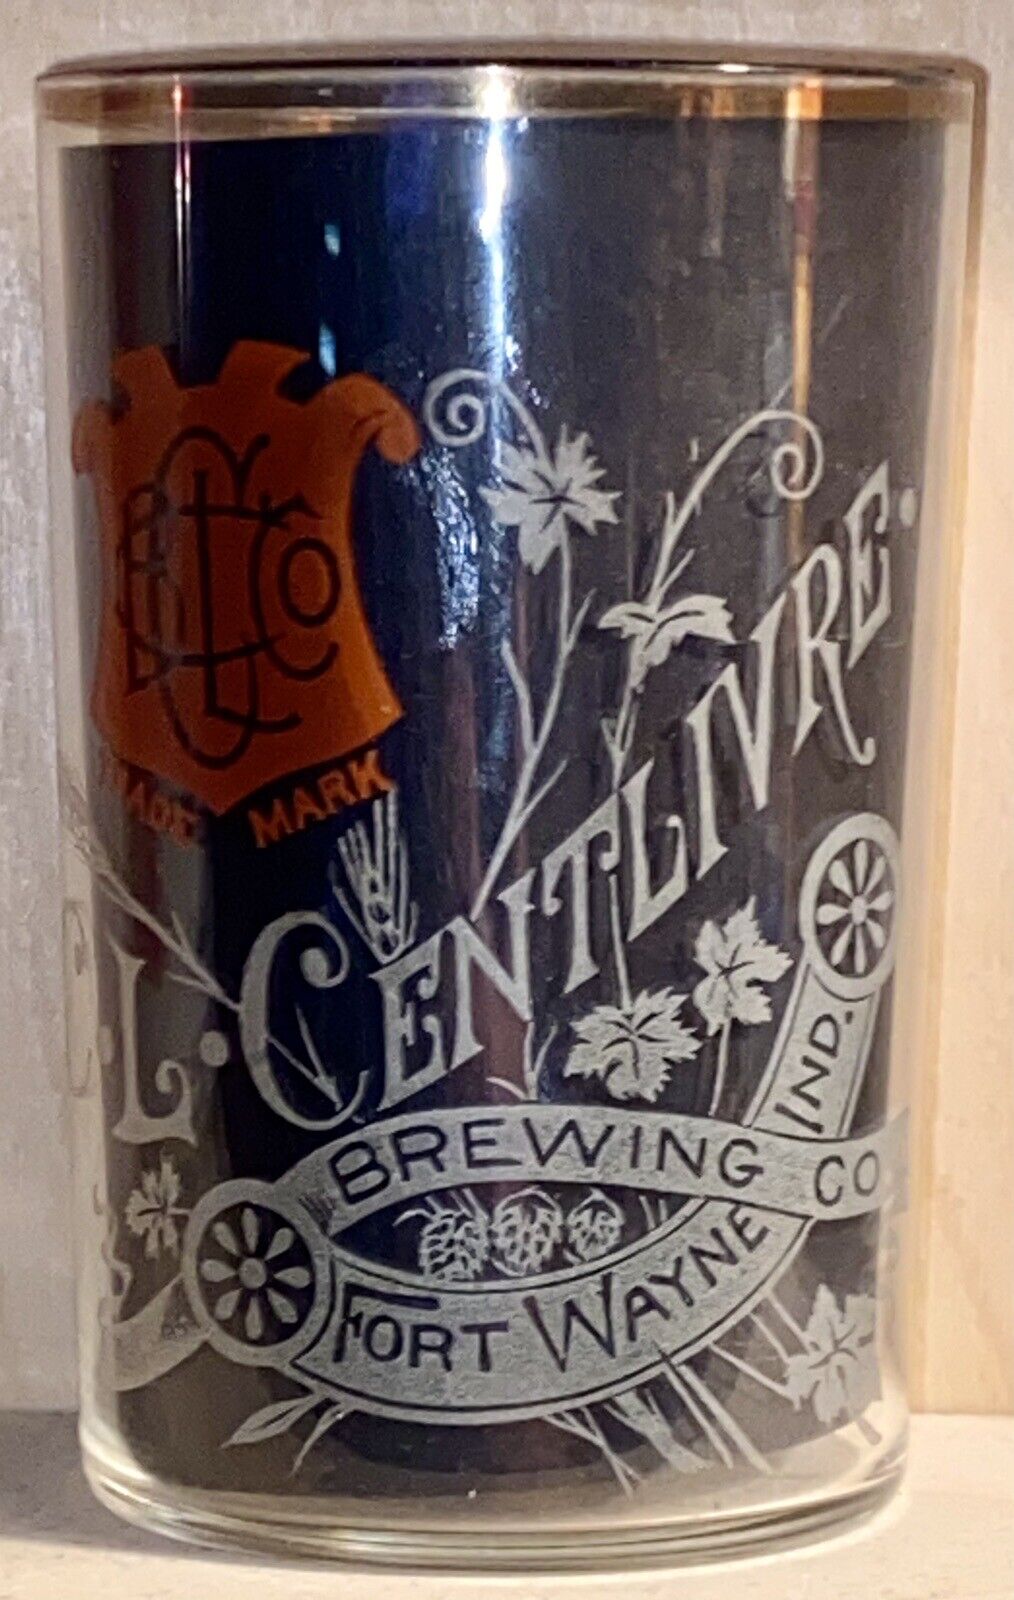 C. L. Centlivre Brewing Co., Etched Bar Glass, Ft. Wayne, IN., Pre-Prohibition